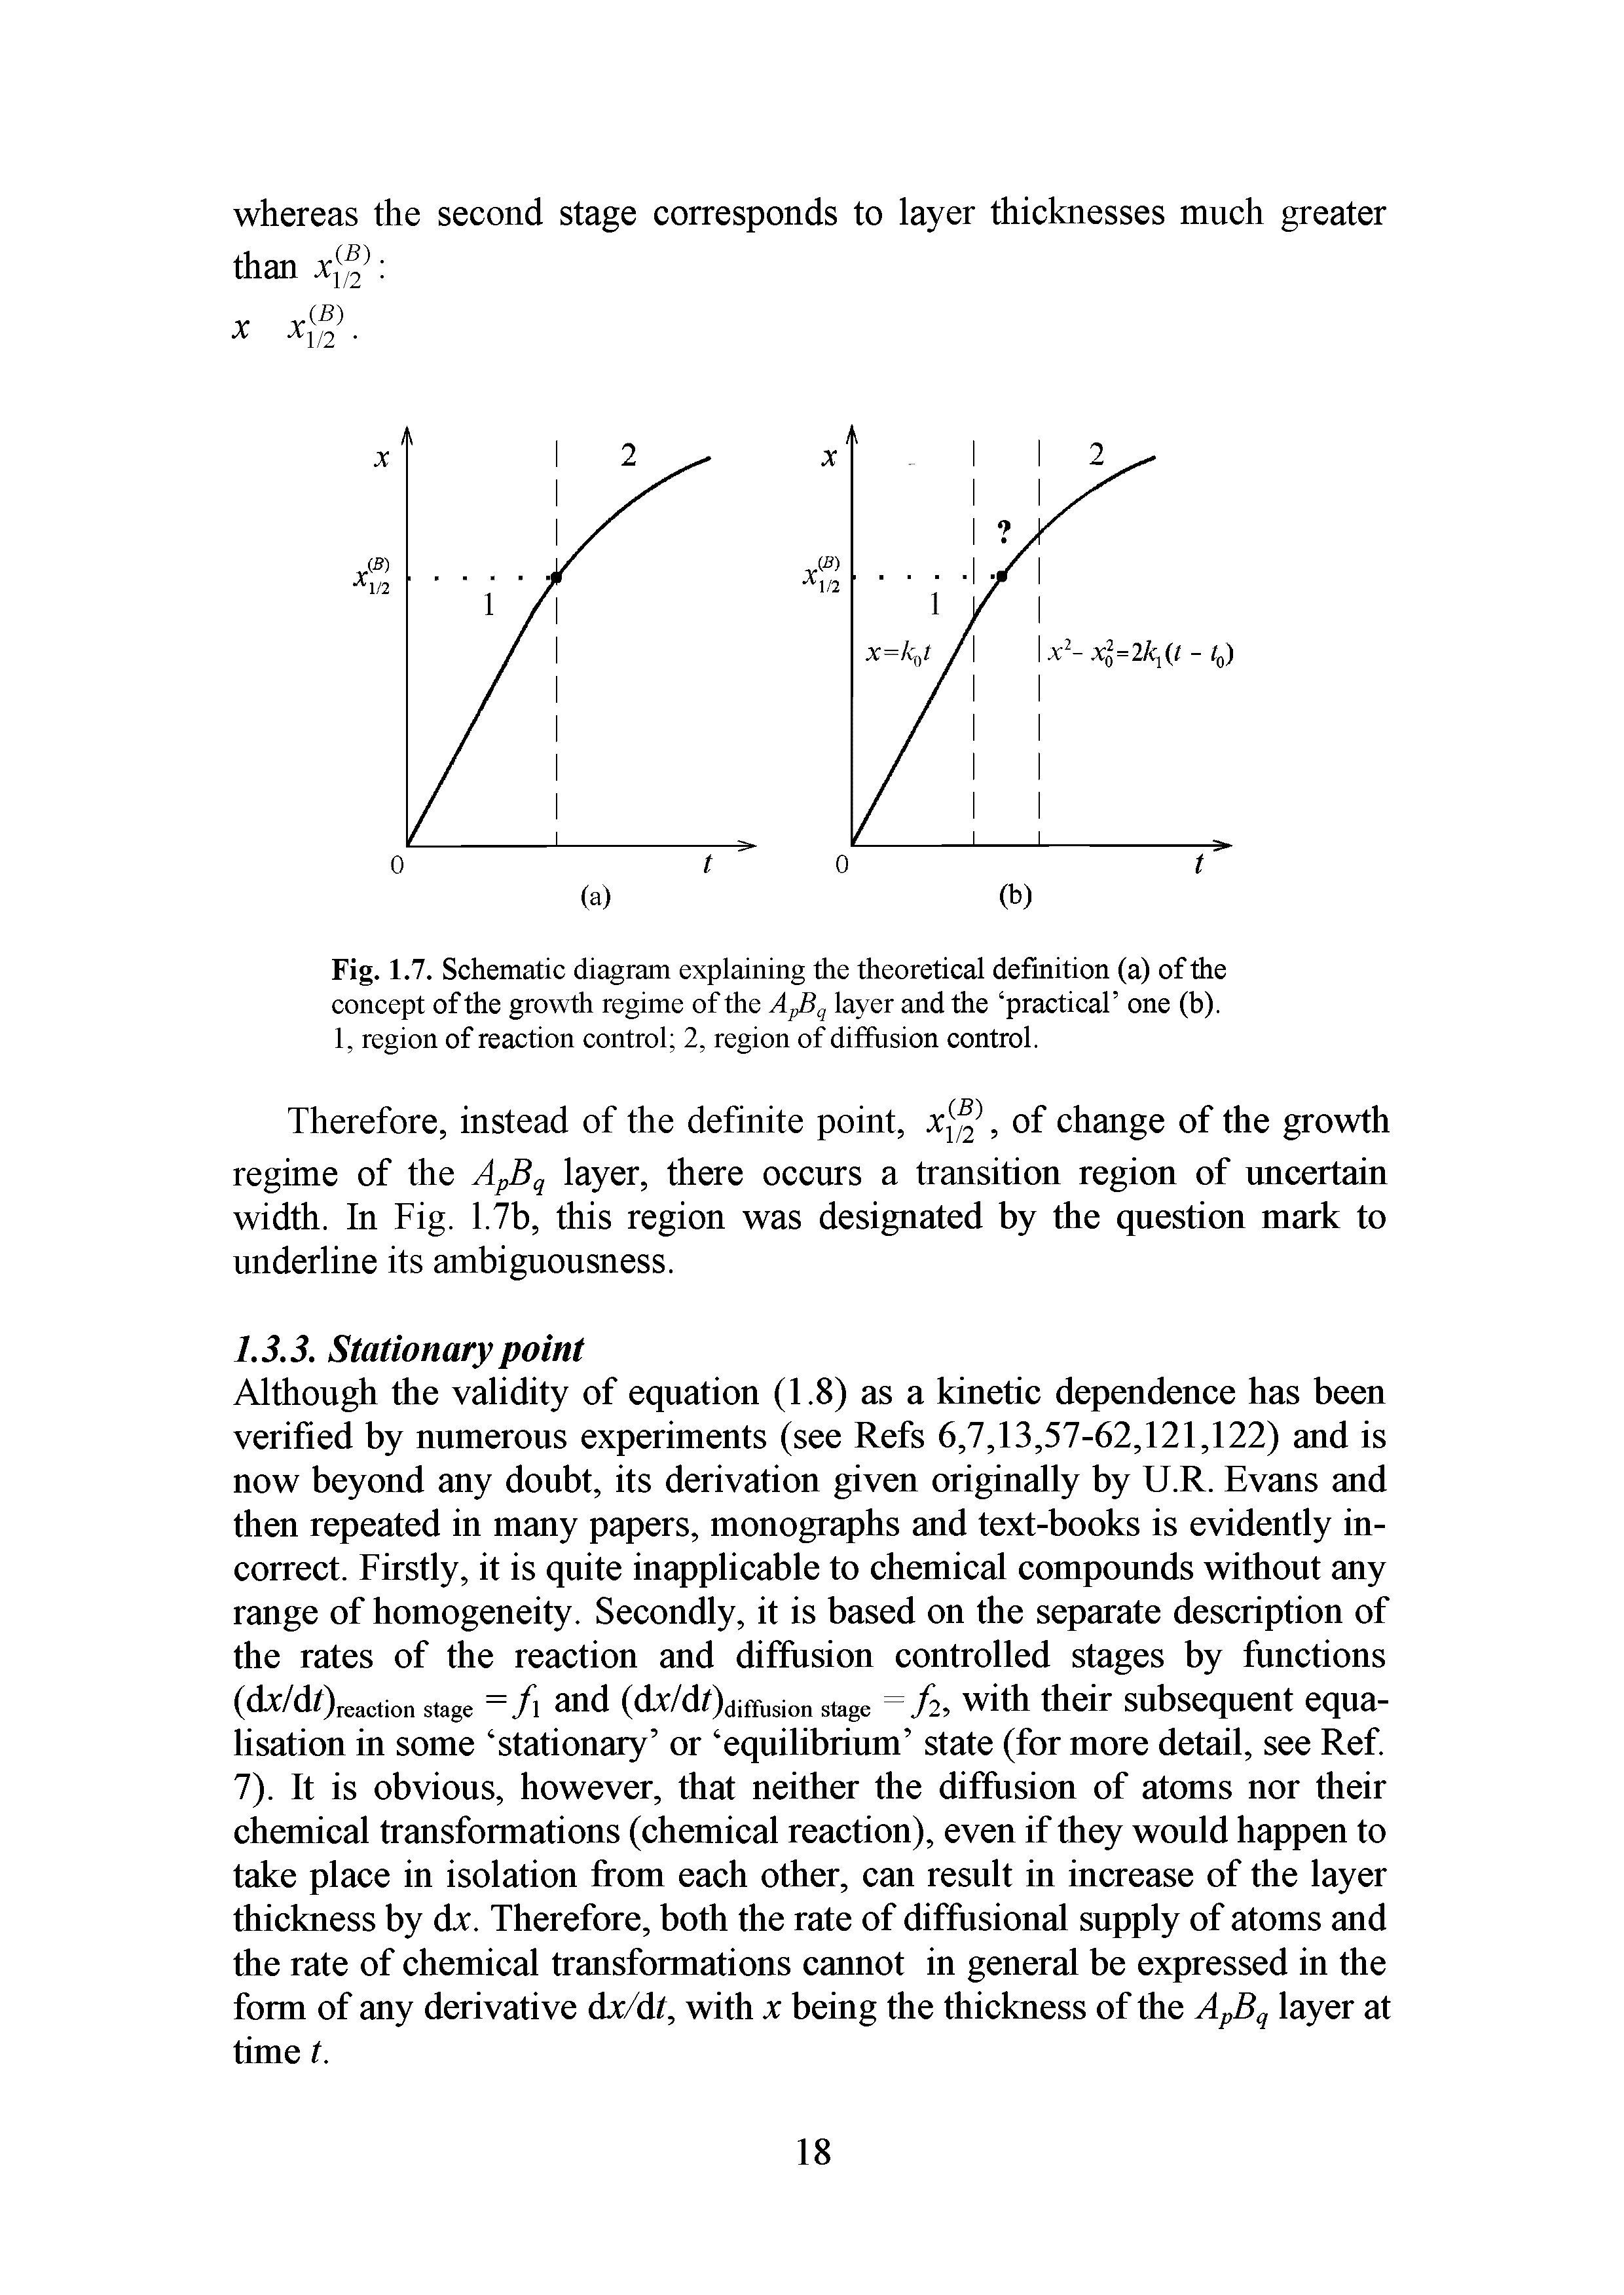 Fig. 1.7. Schematic diagram explaining the theoretical definition (a) of the concept of the growth regime of the ApBq layer and the practical one (b).